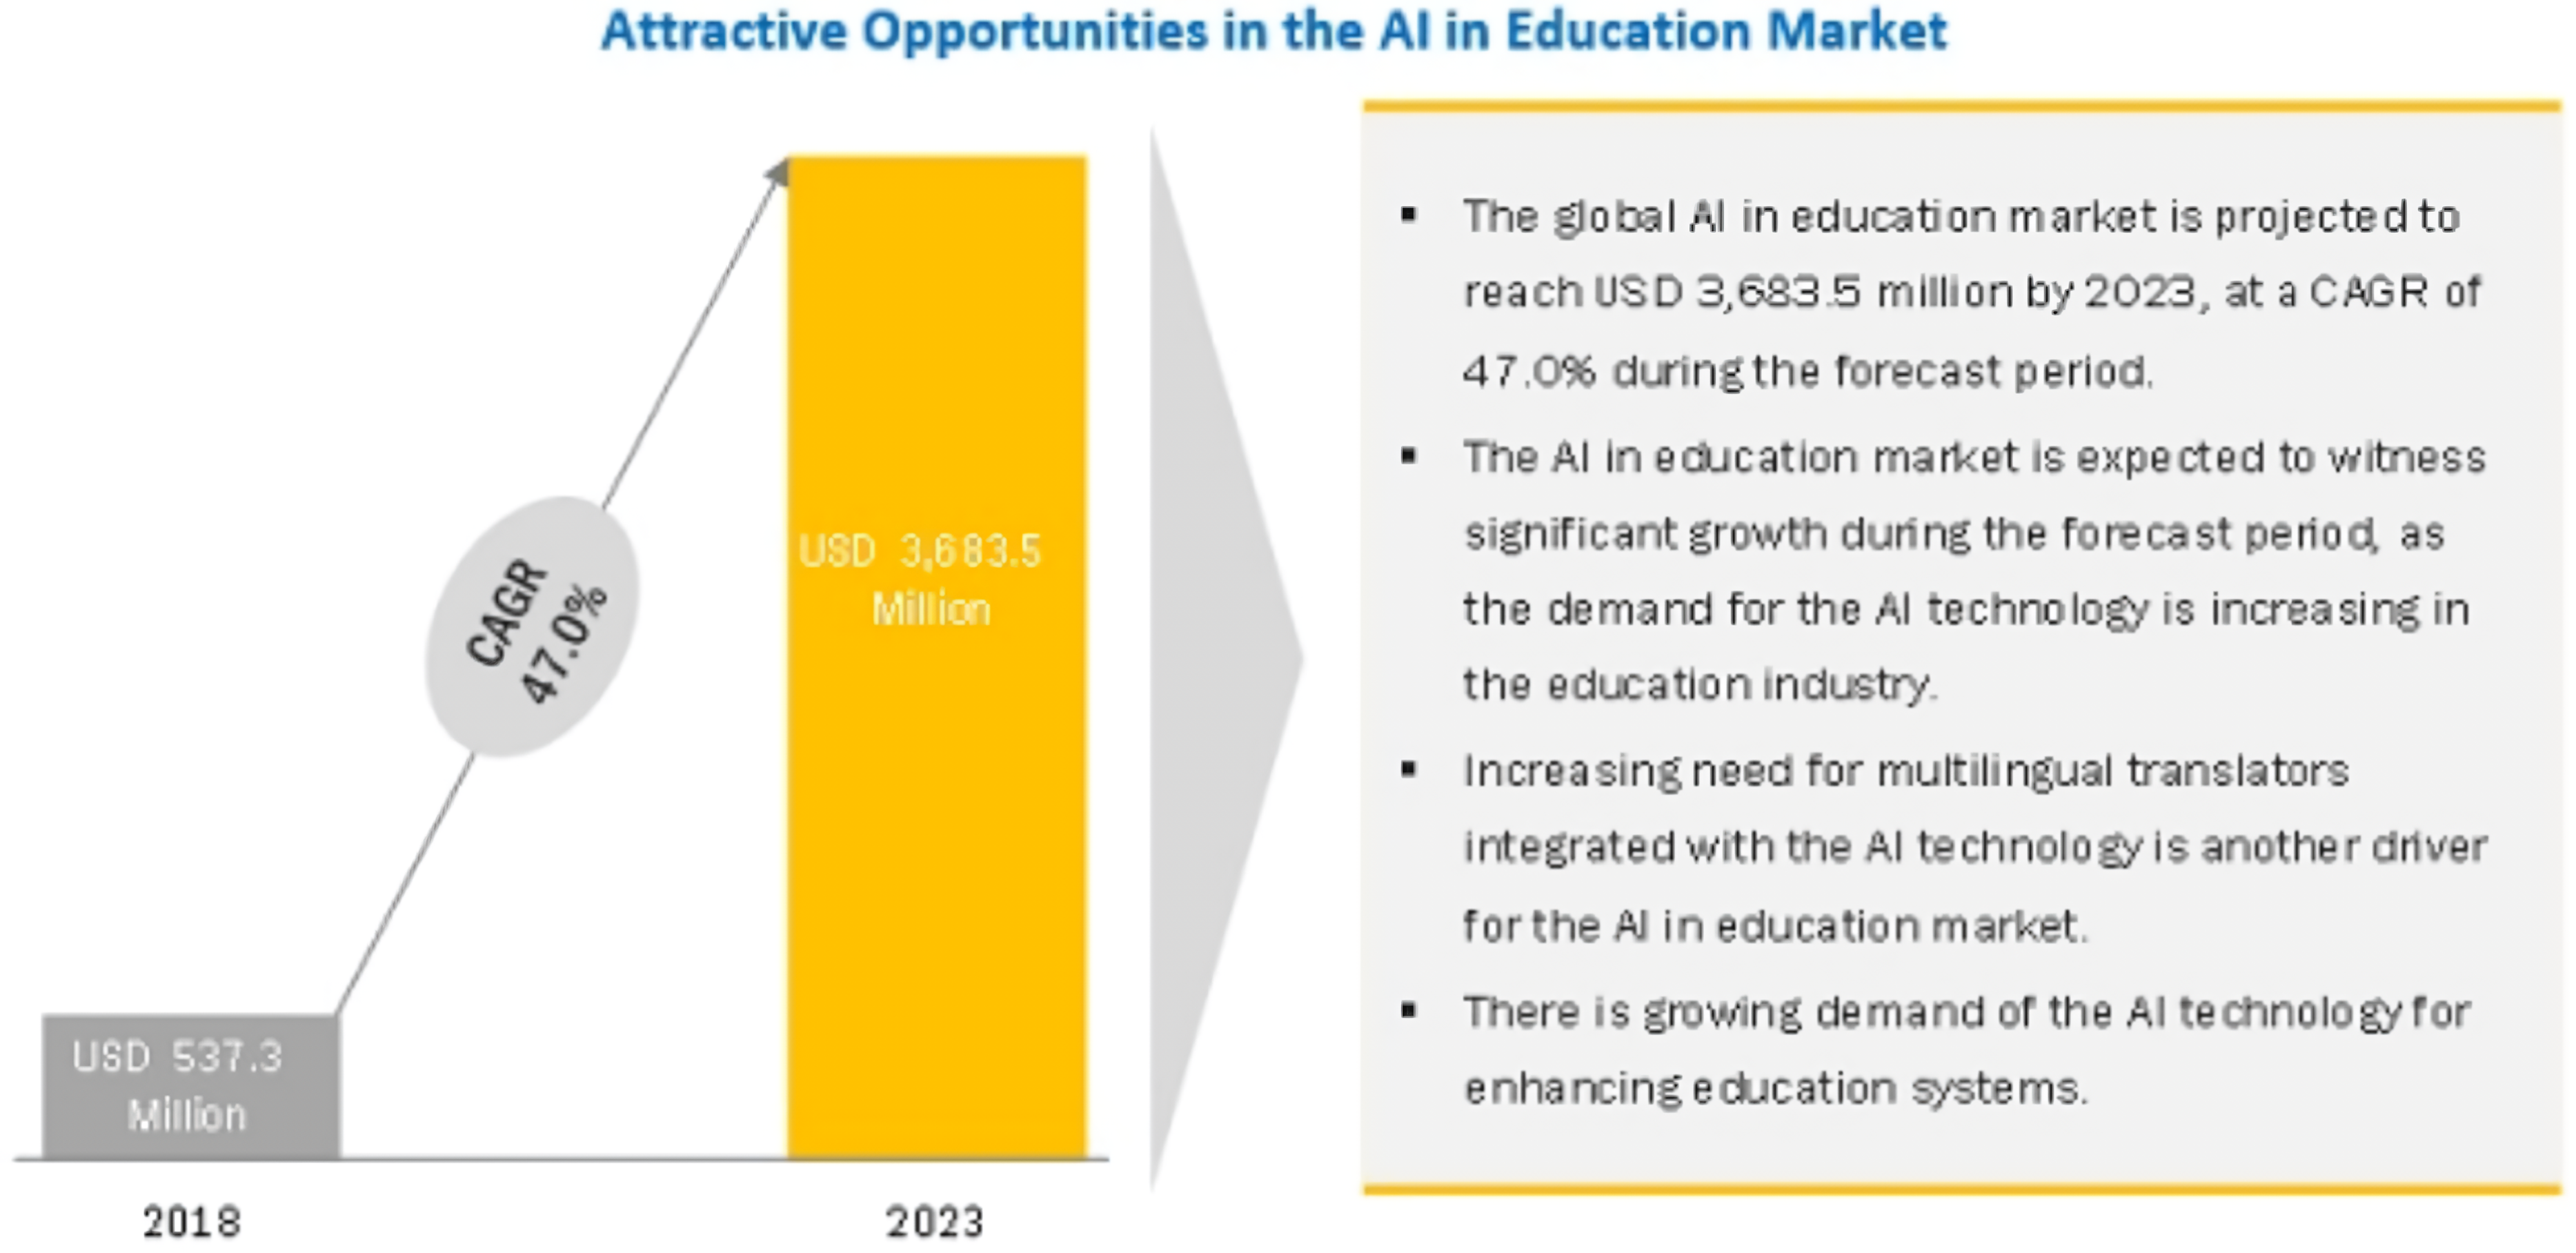 Attractive Opportunities of the AI in Education Market